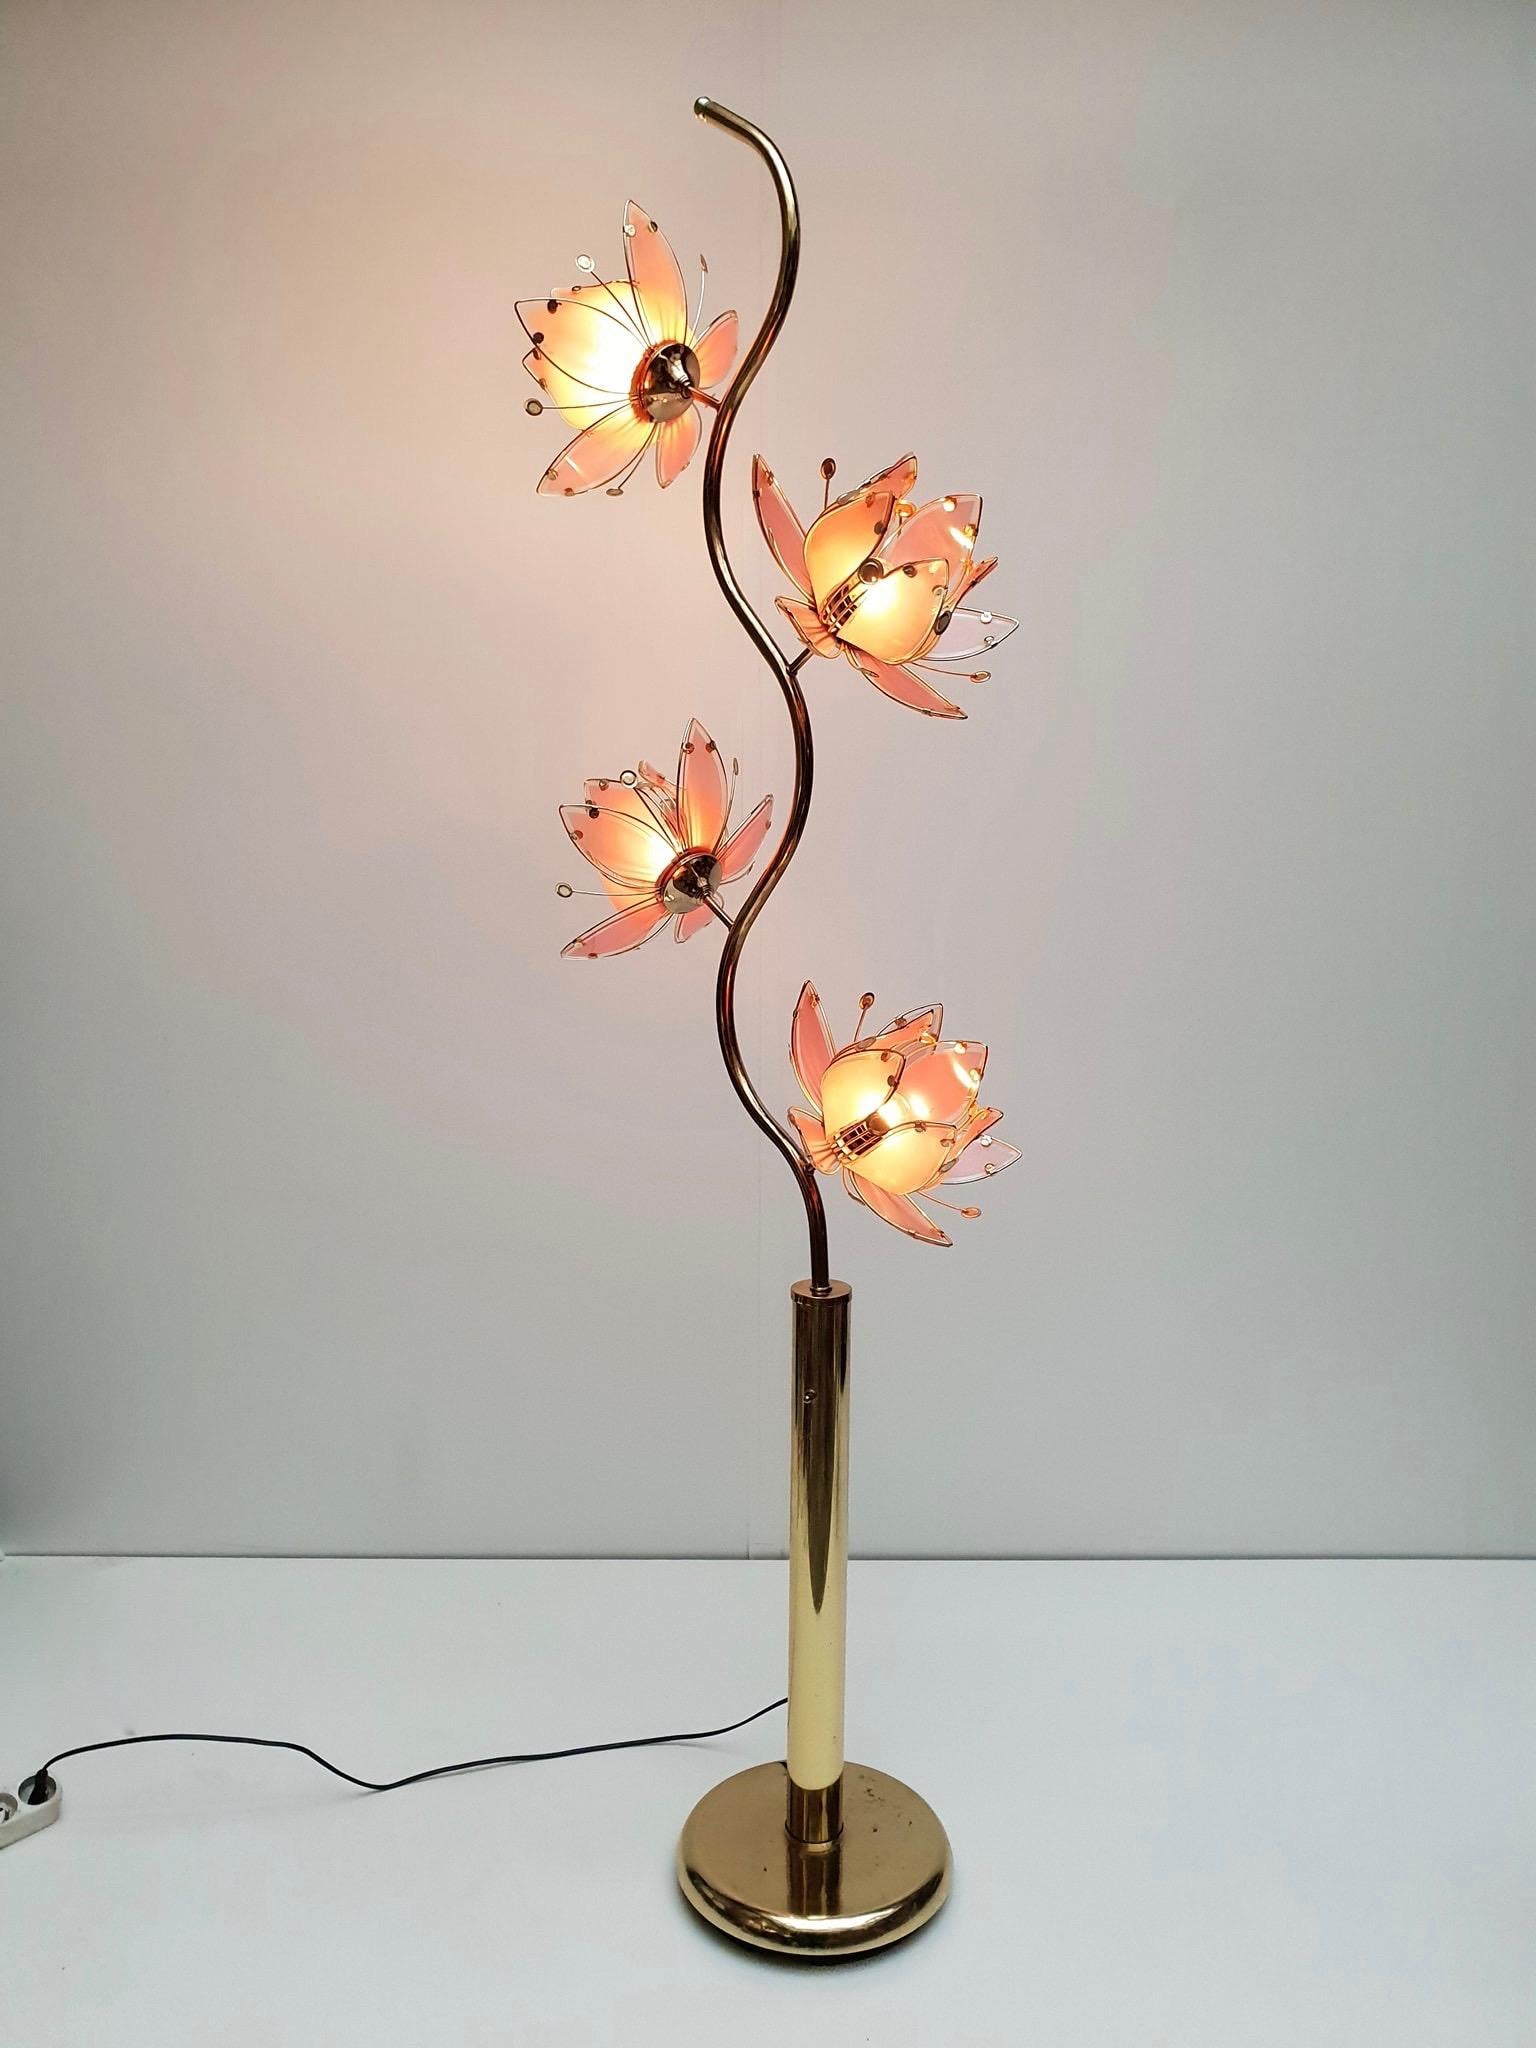 A spectacular Vintage Hollywood Regency Pink Glass Lotus Flower Floor Lamp.This dramatic lamp boasts four huge glass flowers, measuring 33cm in dimeter and 15cm in depth.The light makes a beautiful statement both day and night. It is a bouquet of